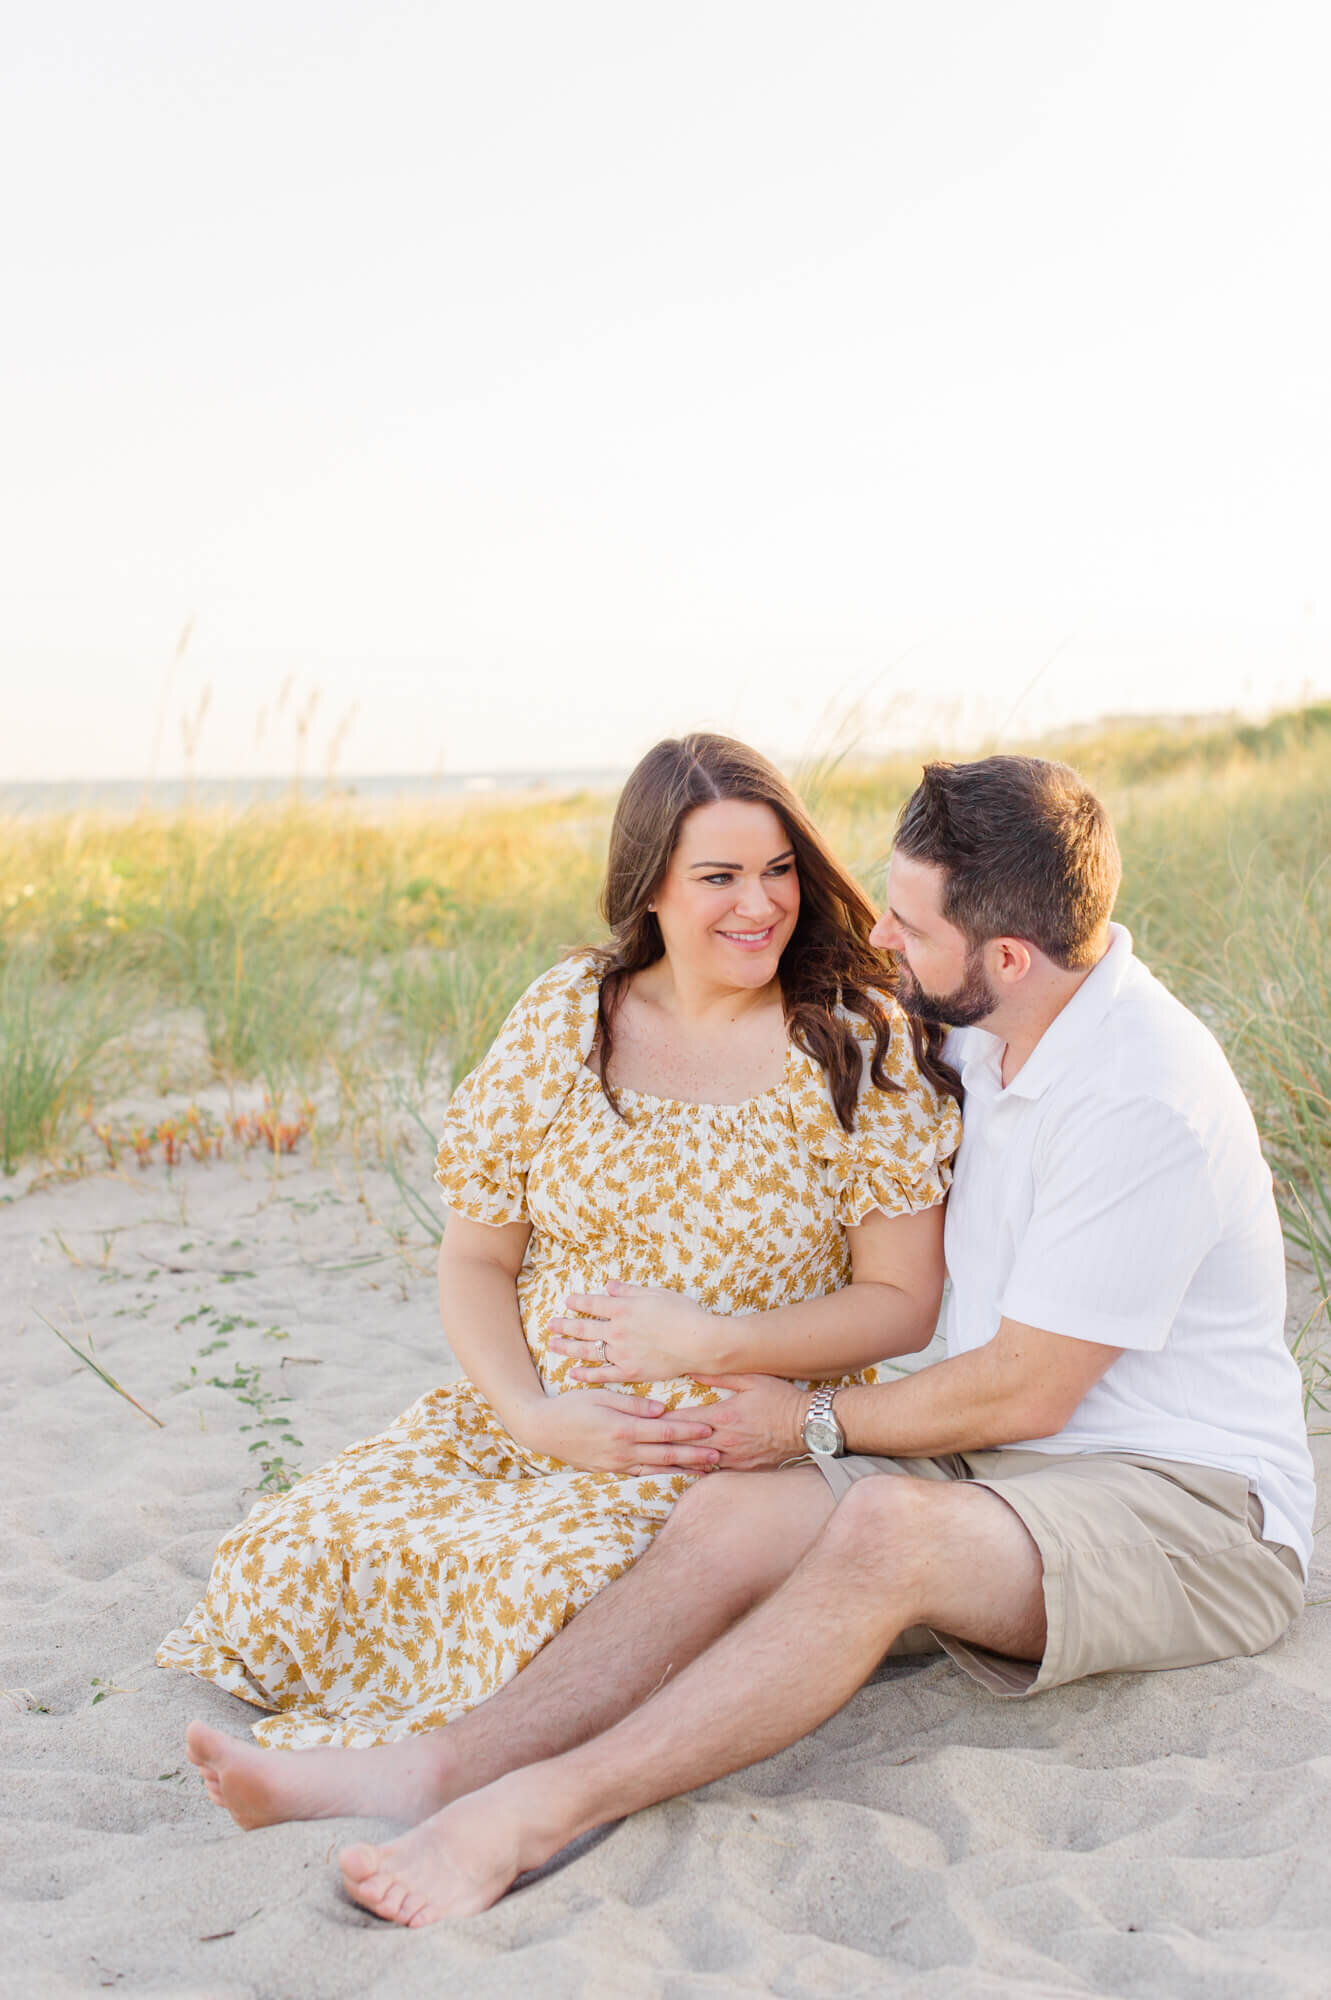 New parents sit in the dunes at golden hour holding mothers belly and smiling at each other during their beach maternity session with an Orlando maternity photographer